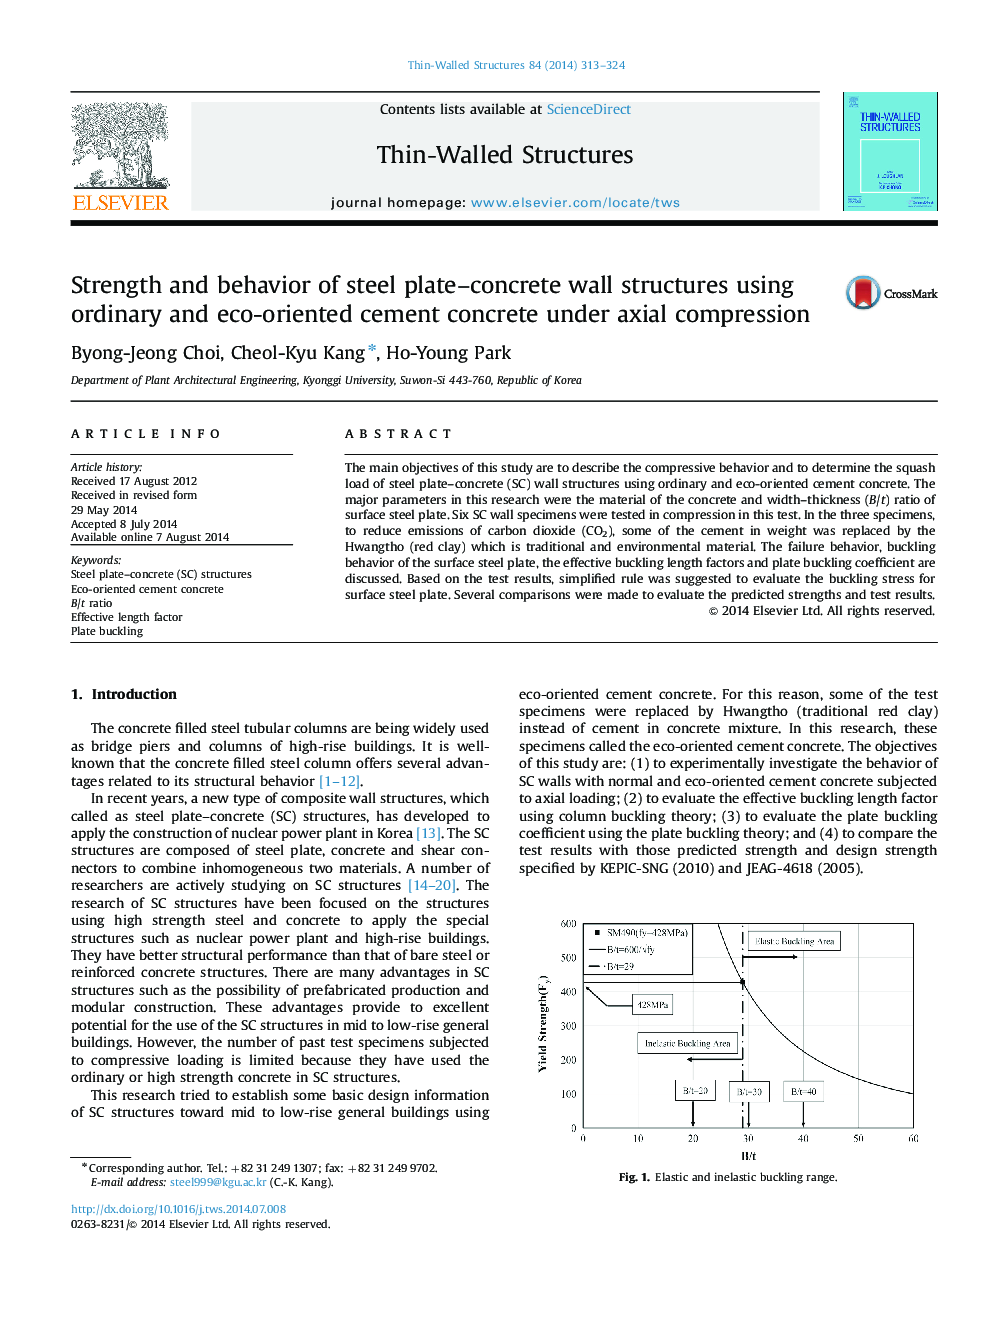 Strength and behavior of steel plate–concrete wall structures using ordinary and eco-oriented cement concrete under axial compression